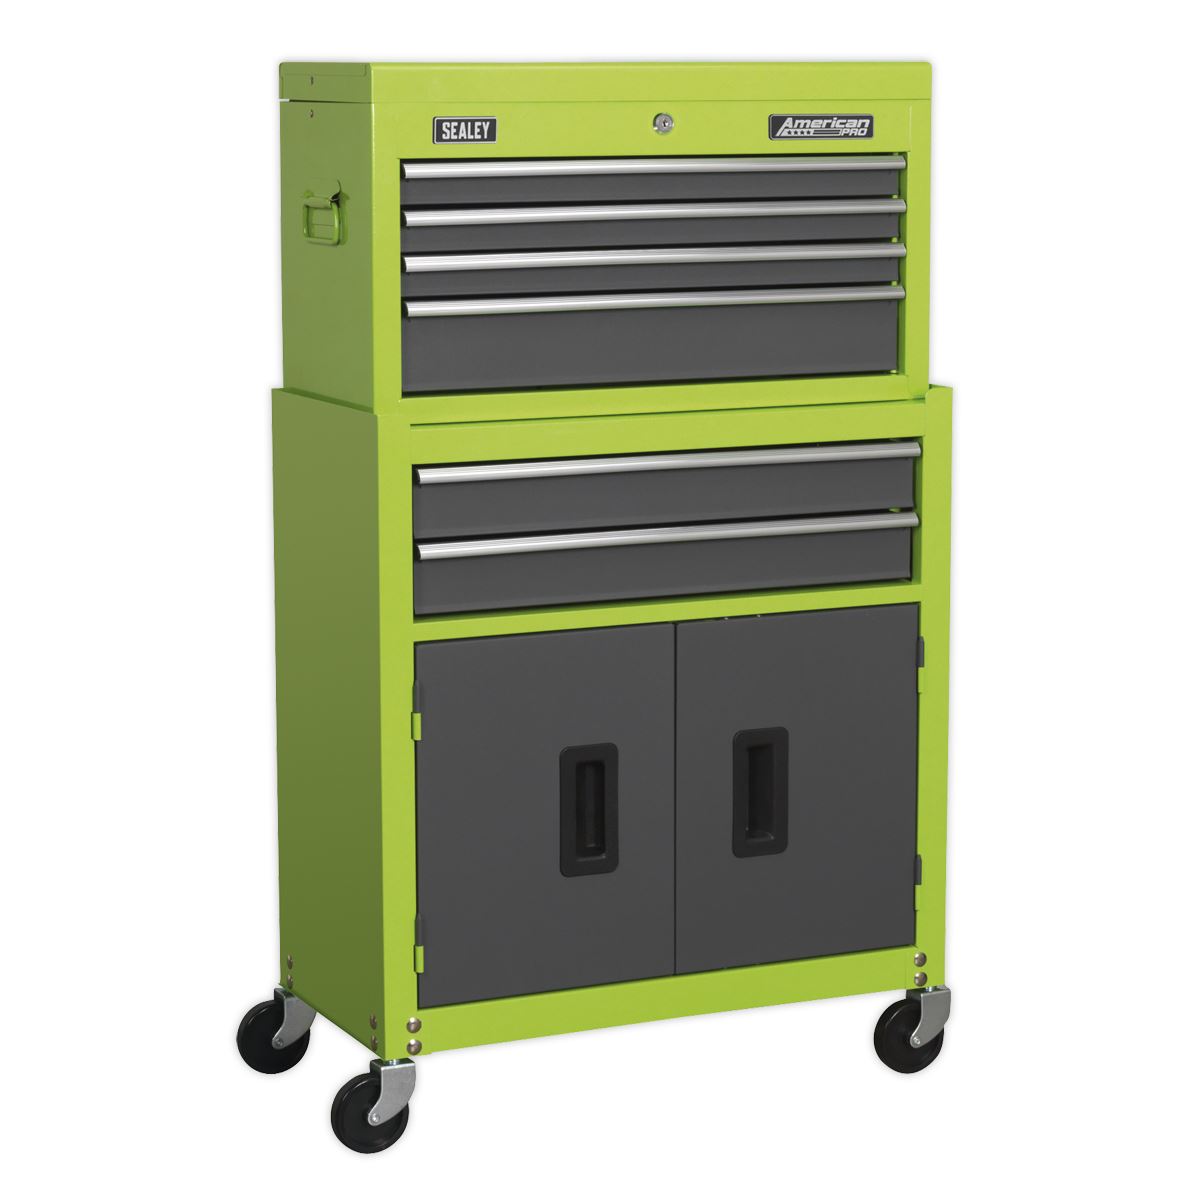 Sealey American Pro Topchest & Rollcab Combination 6 Drawer with Ball-Bearing Slides - Hi-Vis Green/Grey